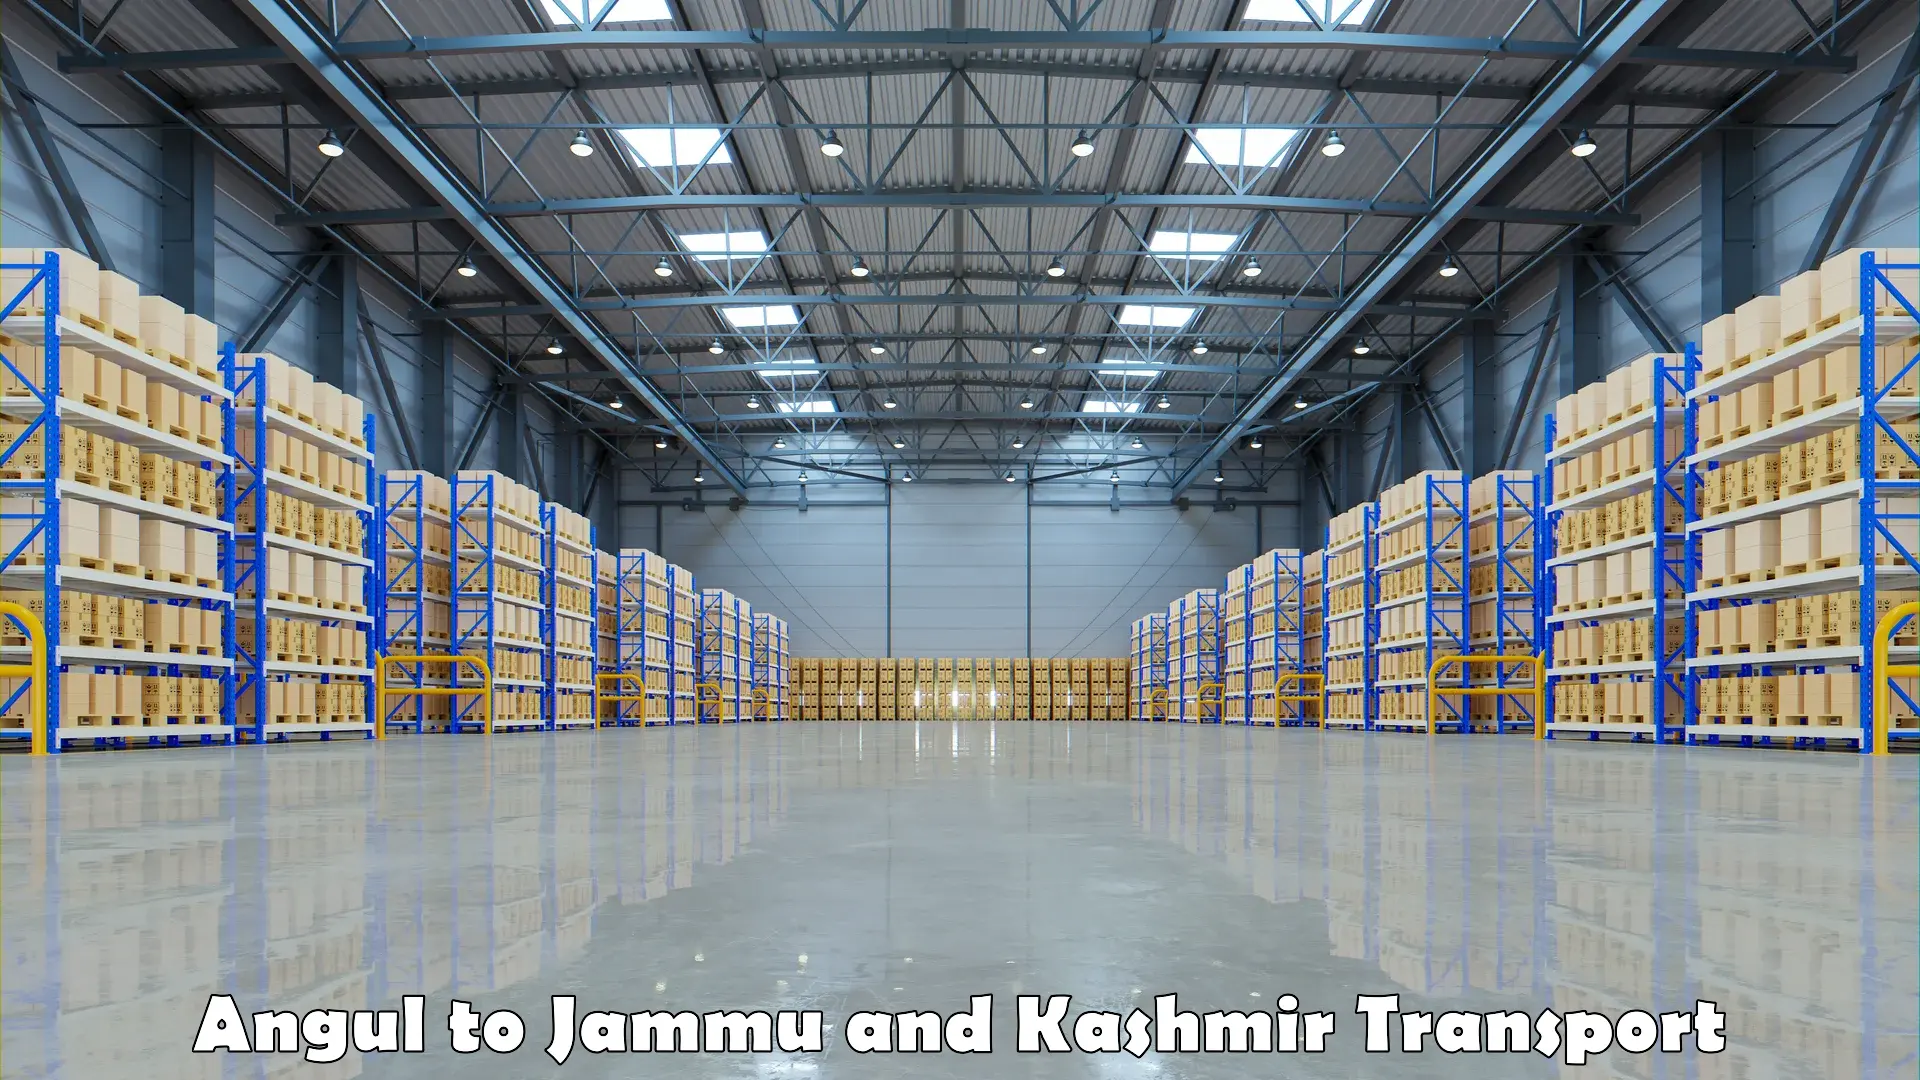 Truck transport companies in India Angul to Jammu and Kashmir